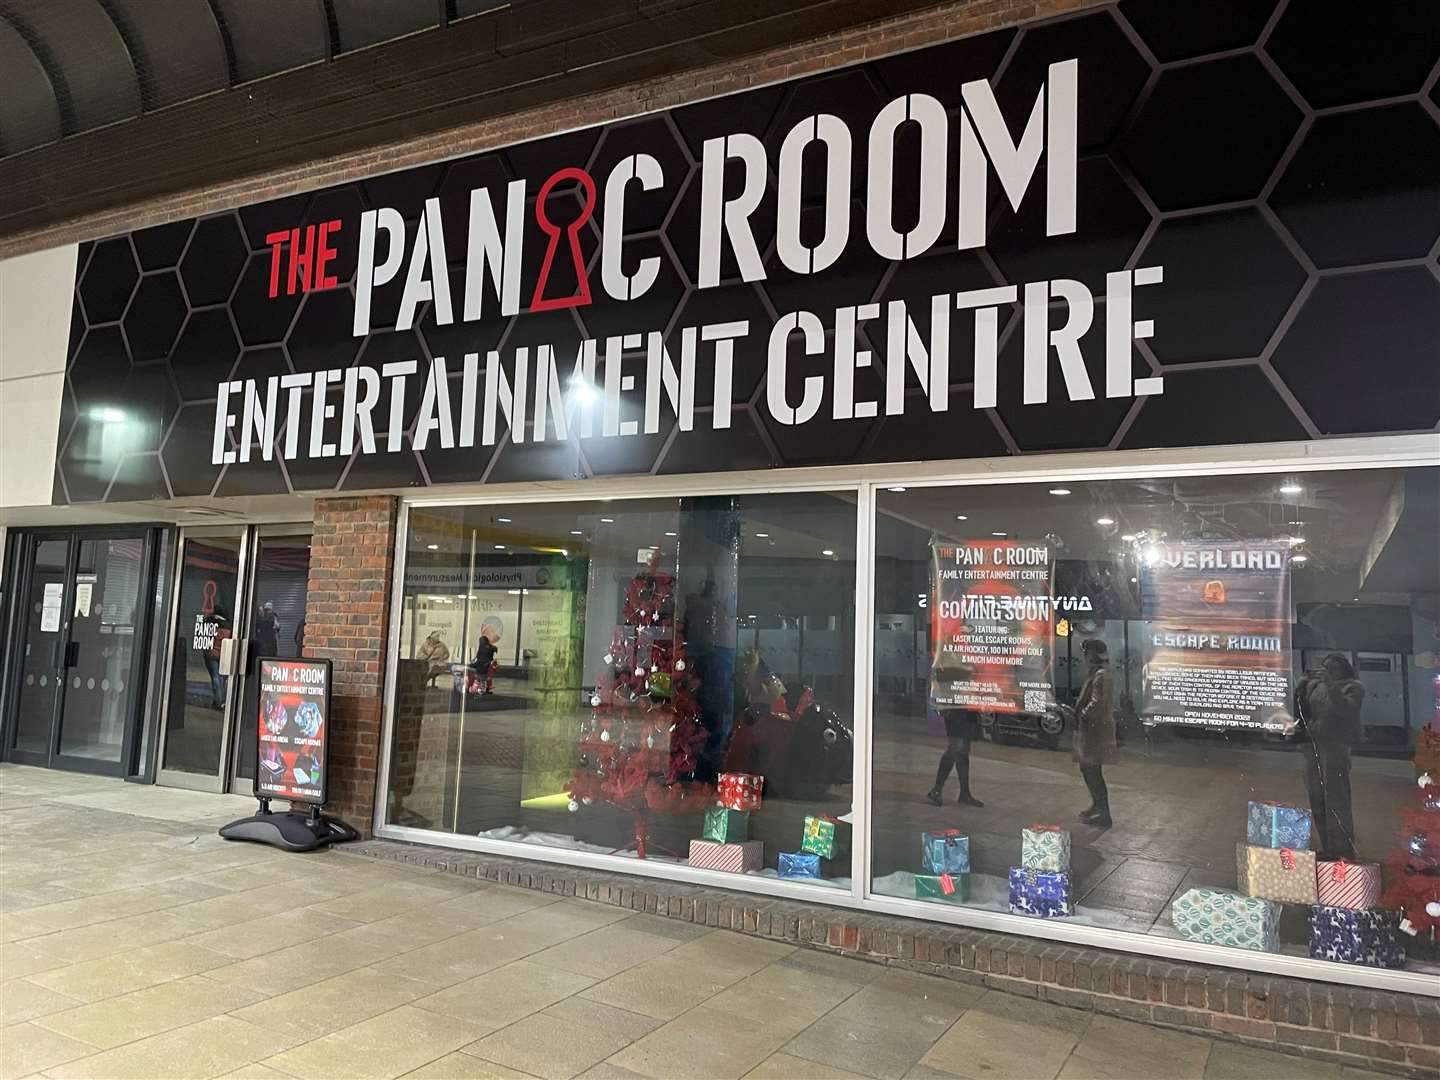 The Panic Room Entertainment Centre in St George's Shopping Centre opened last year